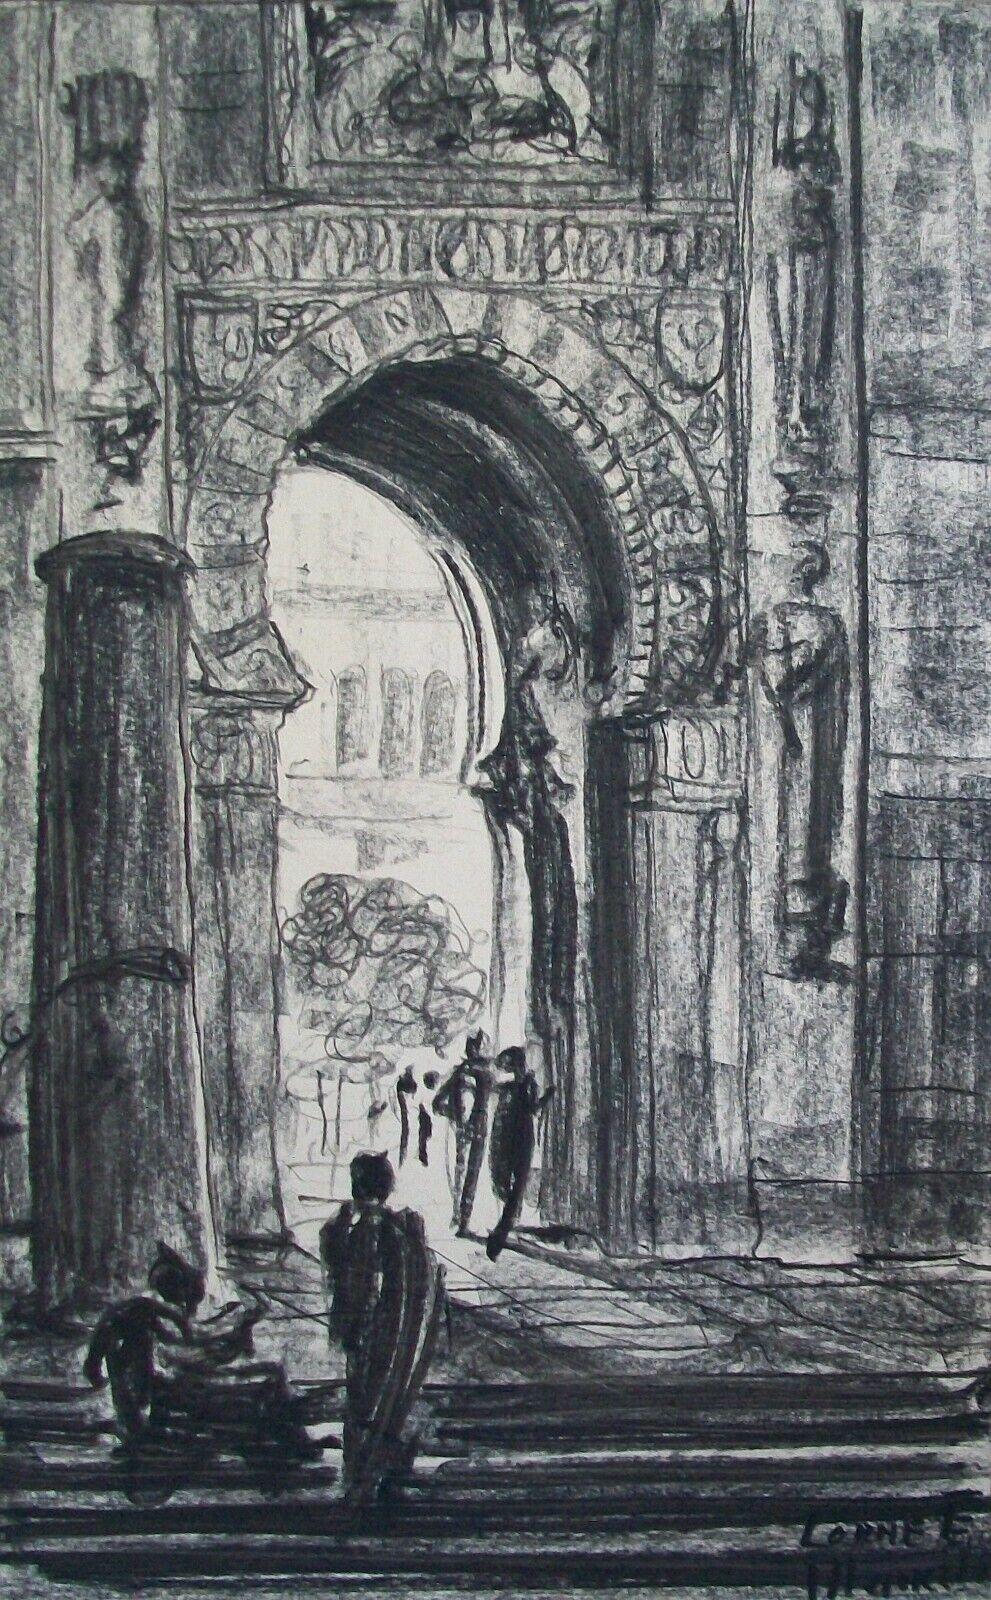 LORNE E. MARKEL (Indistinctly Signed - Unknown/Unidentified Artist) - 'Cordova Mosque' - Antique Orientalist charcoal drawing on paper - architectural study of the 'Great Mosque of Cordoba' with the 'Court of Oranges' in the distance - signed, dated